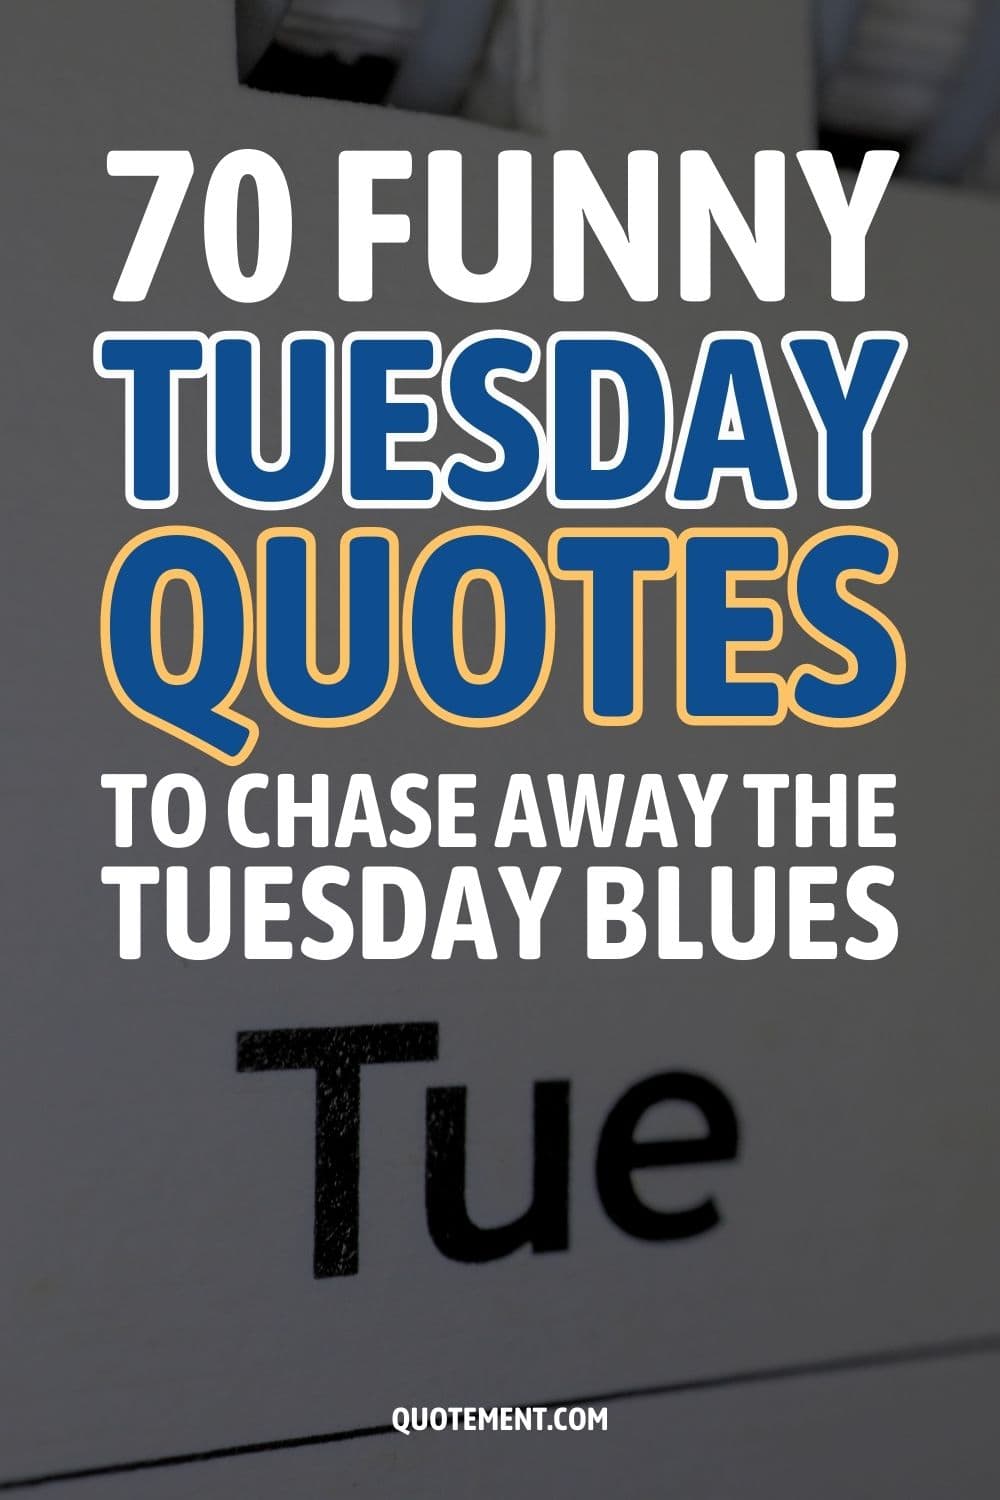 70 Funny Tuesday Quotes To Chase Away The Tuesday Blues
